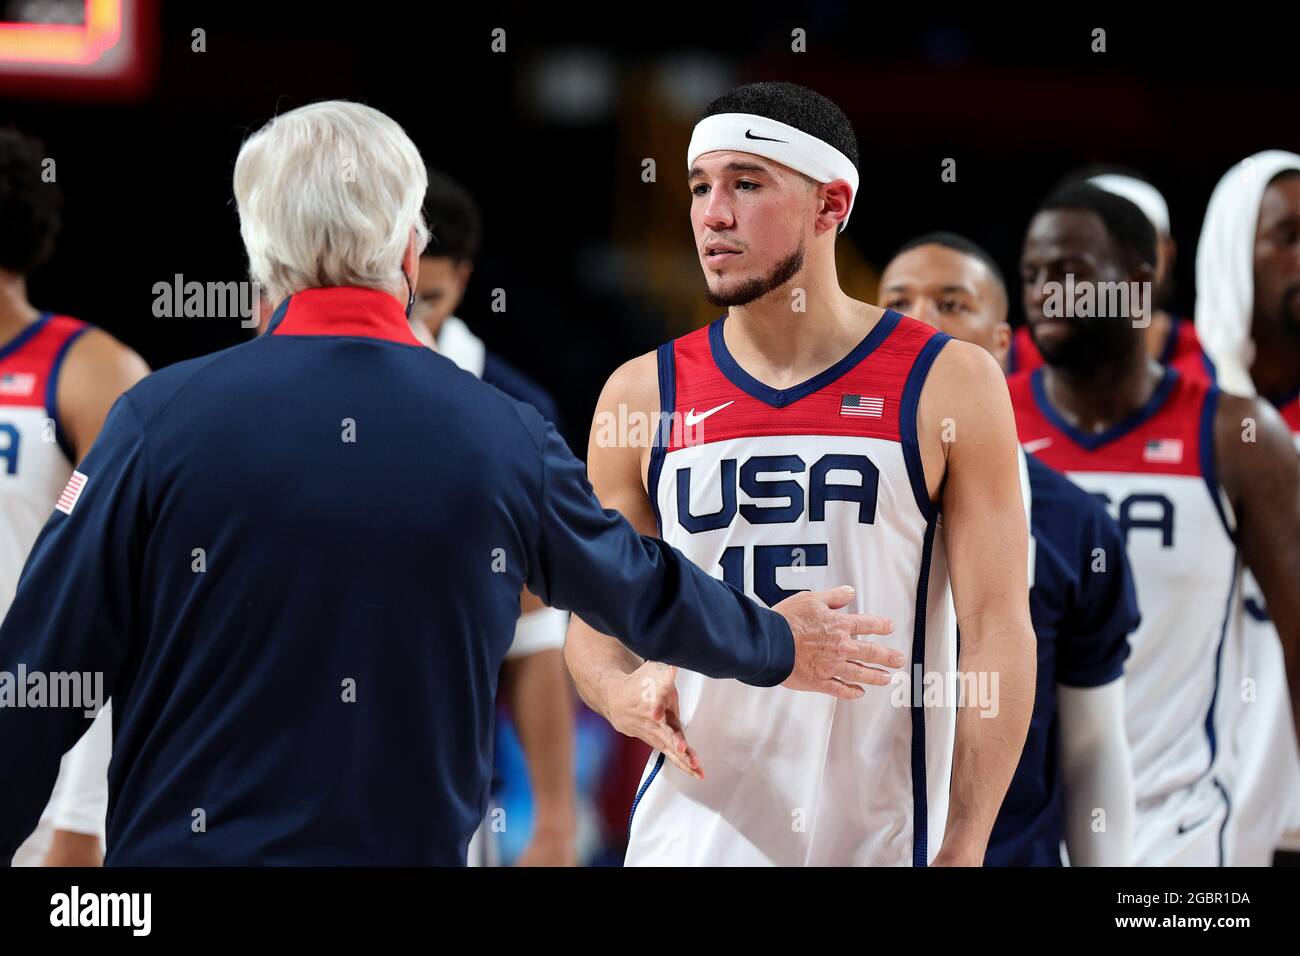 devin booker olympic jersey